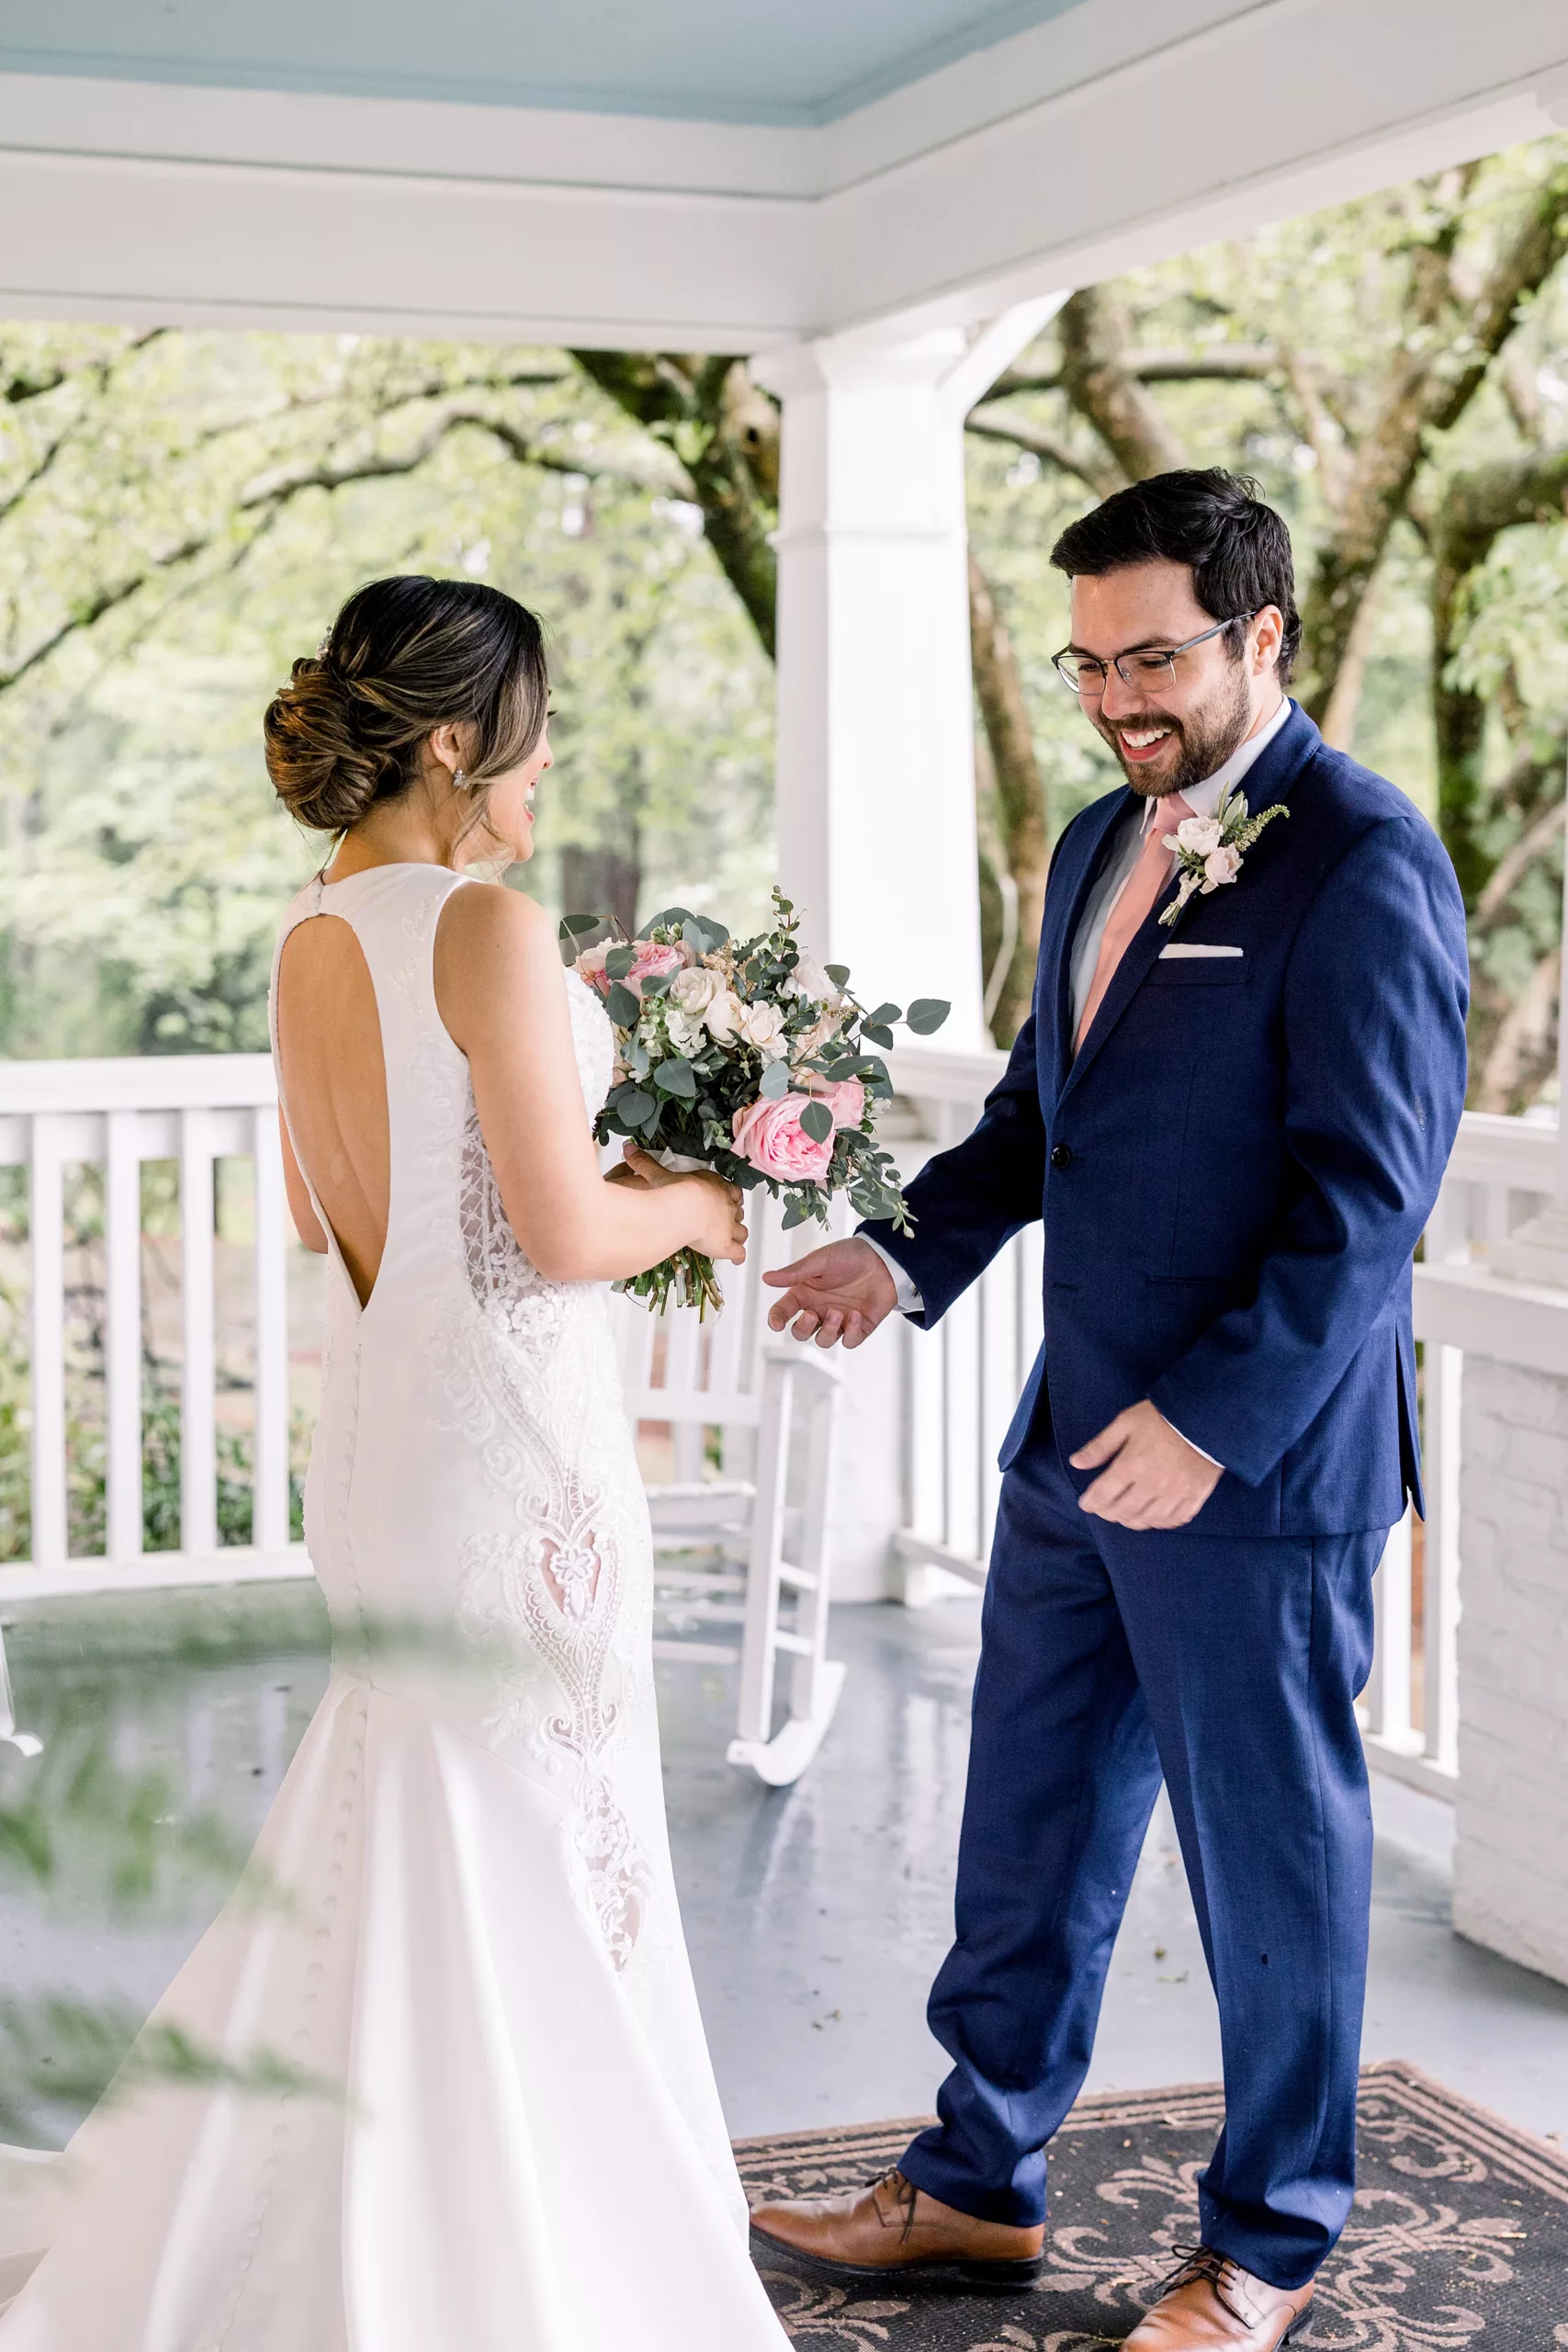 A groom smiles at his bride while wearing a blue suit and pink tie as he sees her for the first time in her dress during a pre wedding first look